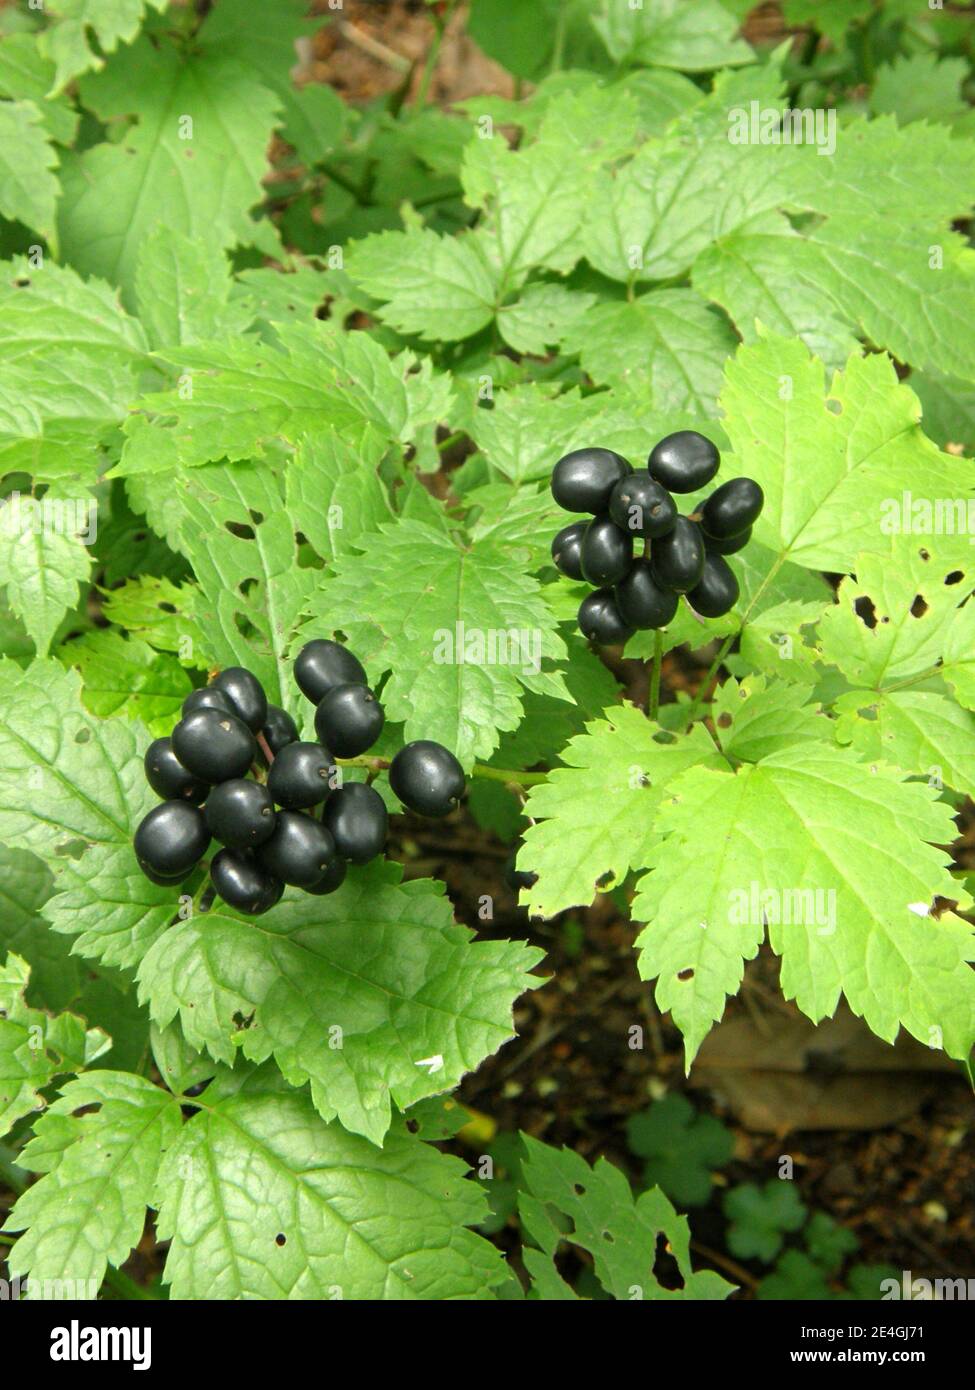 Black glossy baneberry (Actaea spicata) fruits in a garden in August Stock Photo